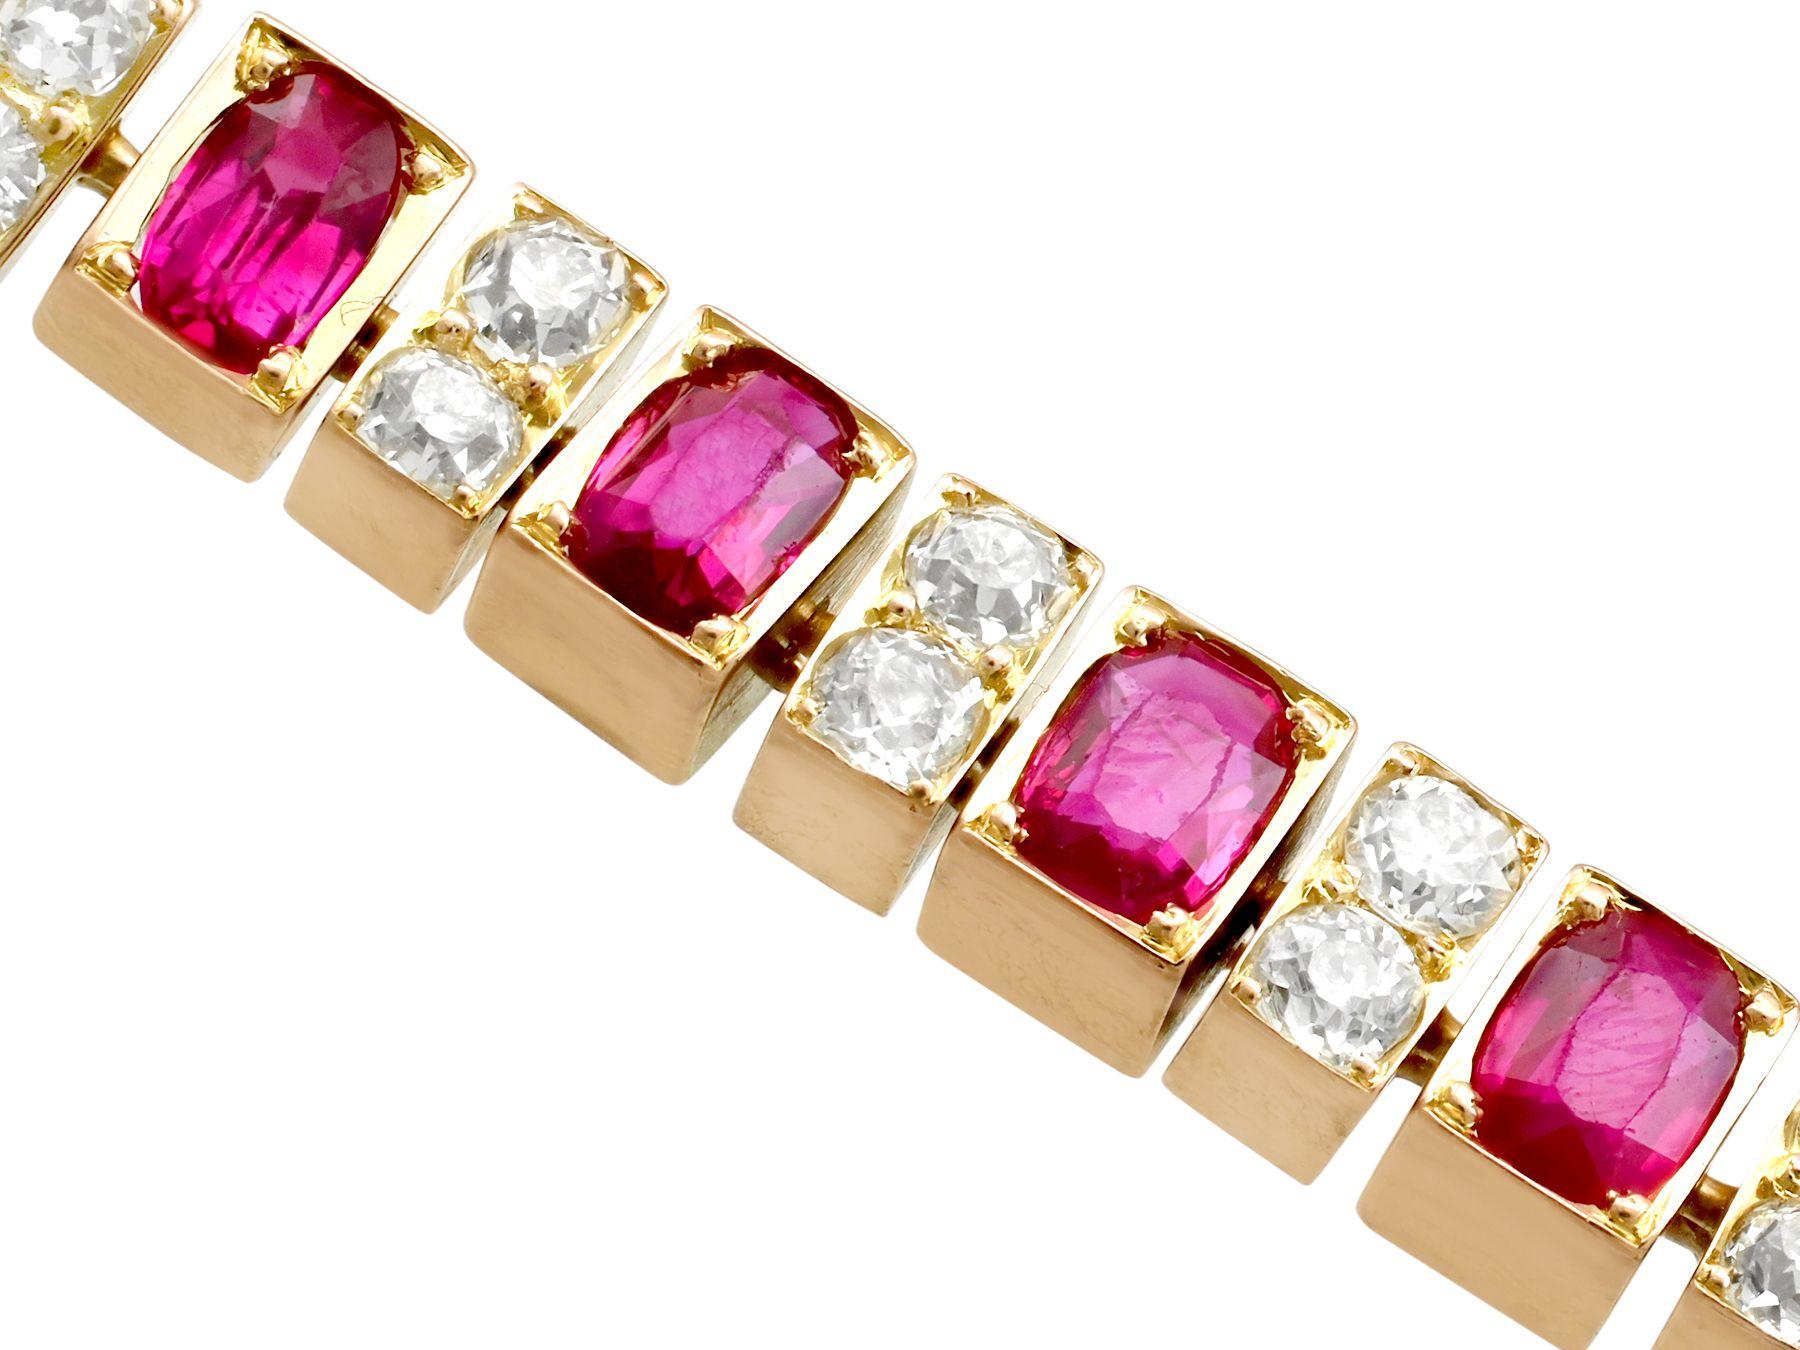 1930s Antique 3.30 Carat Ruby and 1.00 Carat Diamond Yellow Gold Line Bracelet In Excellent Condition For Sale In Jesmond, Newcastle Upon Tyne